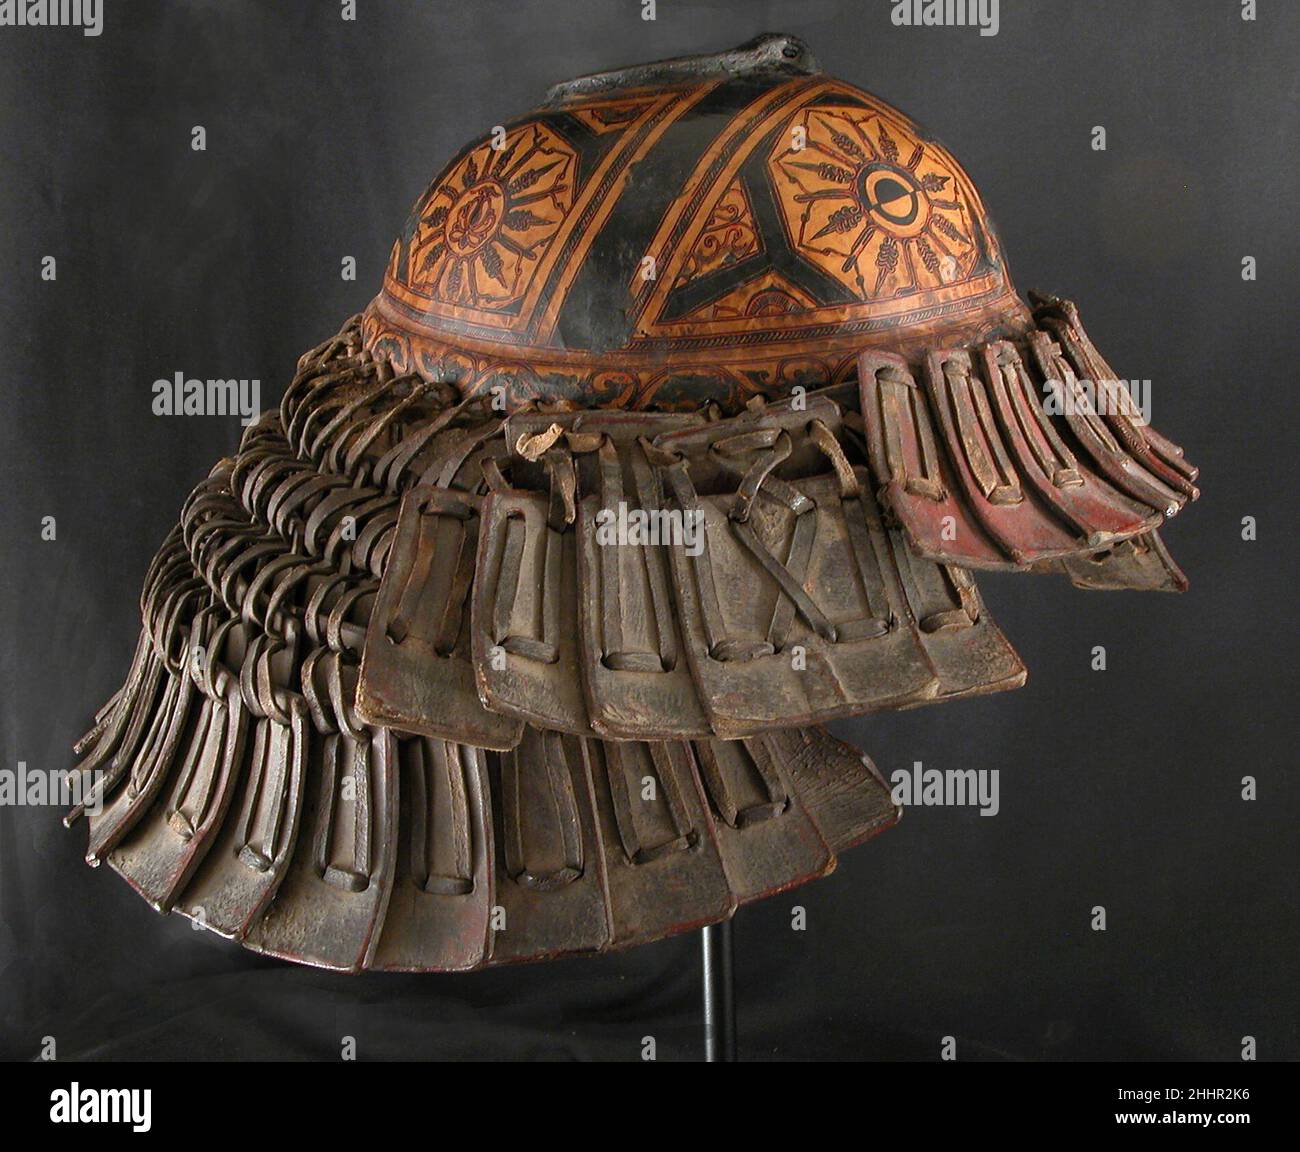 Helmet possibly 17th century Yi or Nuosu people (Lolo) The Nuosu (also formerly known as Lolo) are part of the Yi peoples and have lived in mountainous sections of southwestern China, covering parts of Sichuan, eastern Yunnan, and Guizhou provinces, for approximately the past one thousand years. Arts and crafts flourished in traditional Nuosu culture, including weaving, embroidery, silversmithing, and lacquerwork. Notable among the lacquerwork is Nuosu armor, which is made of lacquered leather in a style that is unique to the region and can be recognized by its form, construction, and decorati Stock Photo